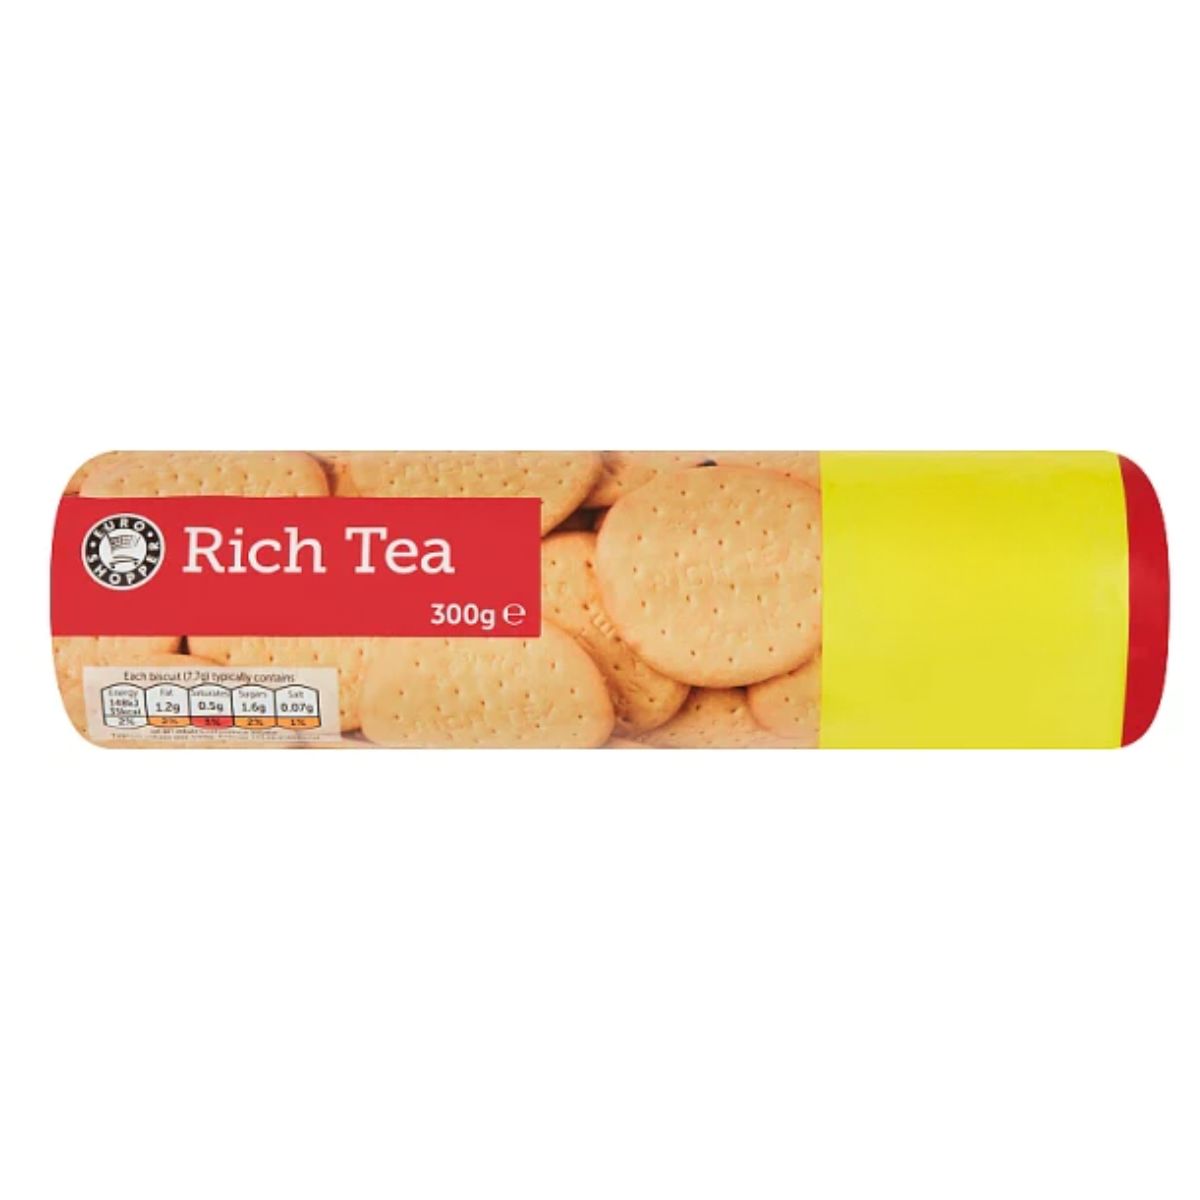 A package of Euro Shopper - Rich Tea - 300g crackers on a white background.